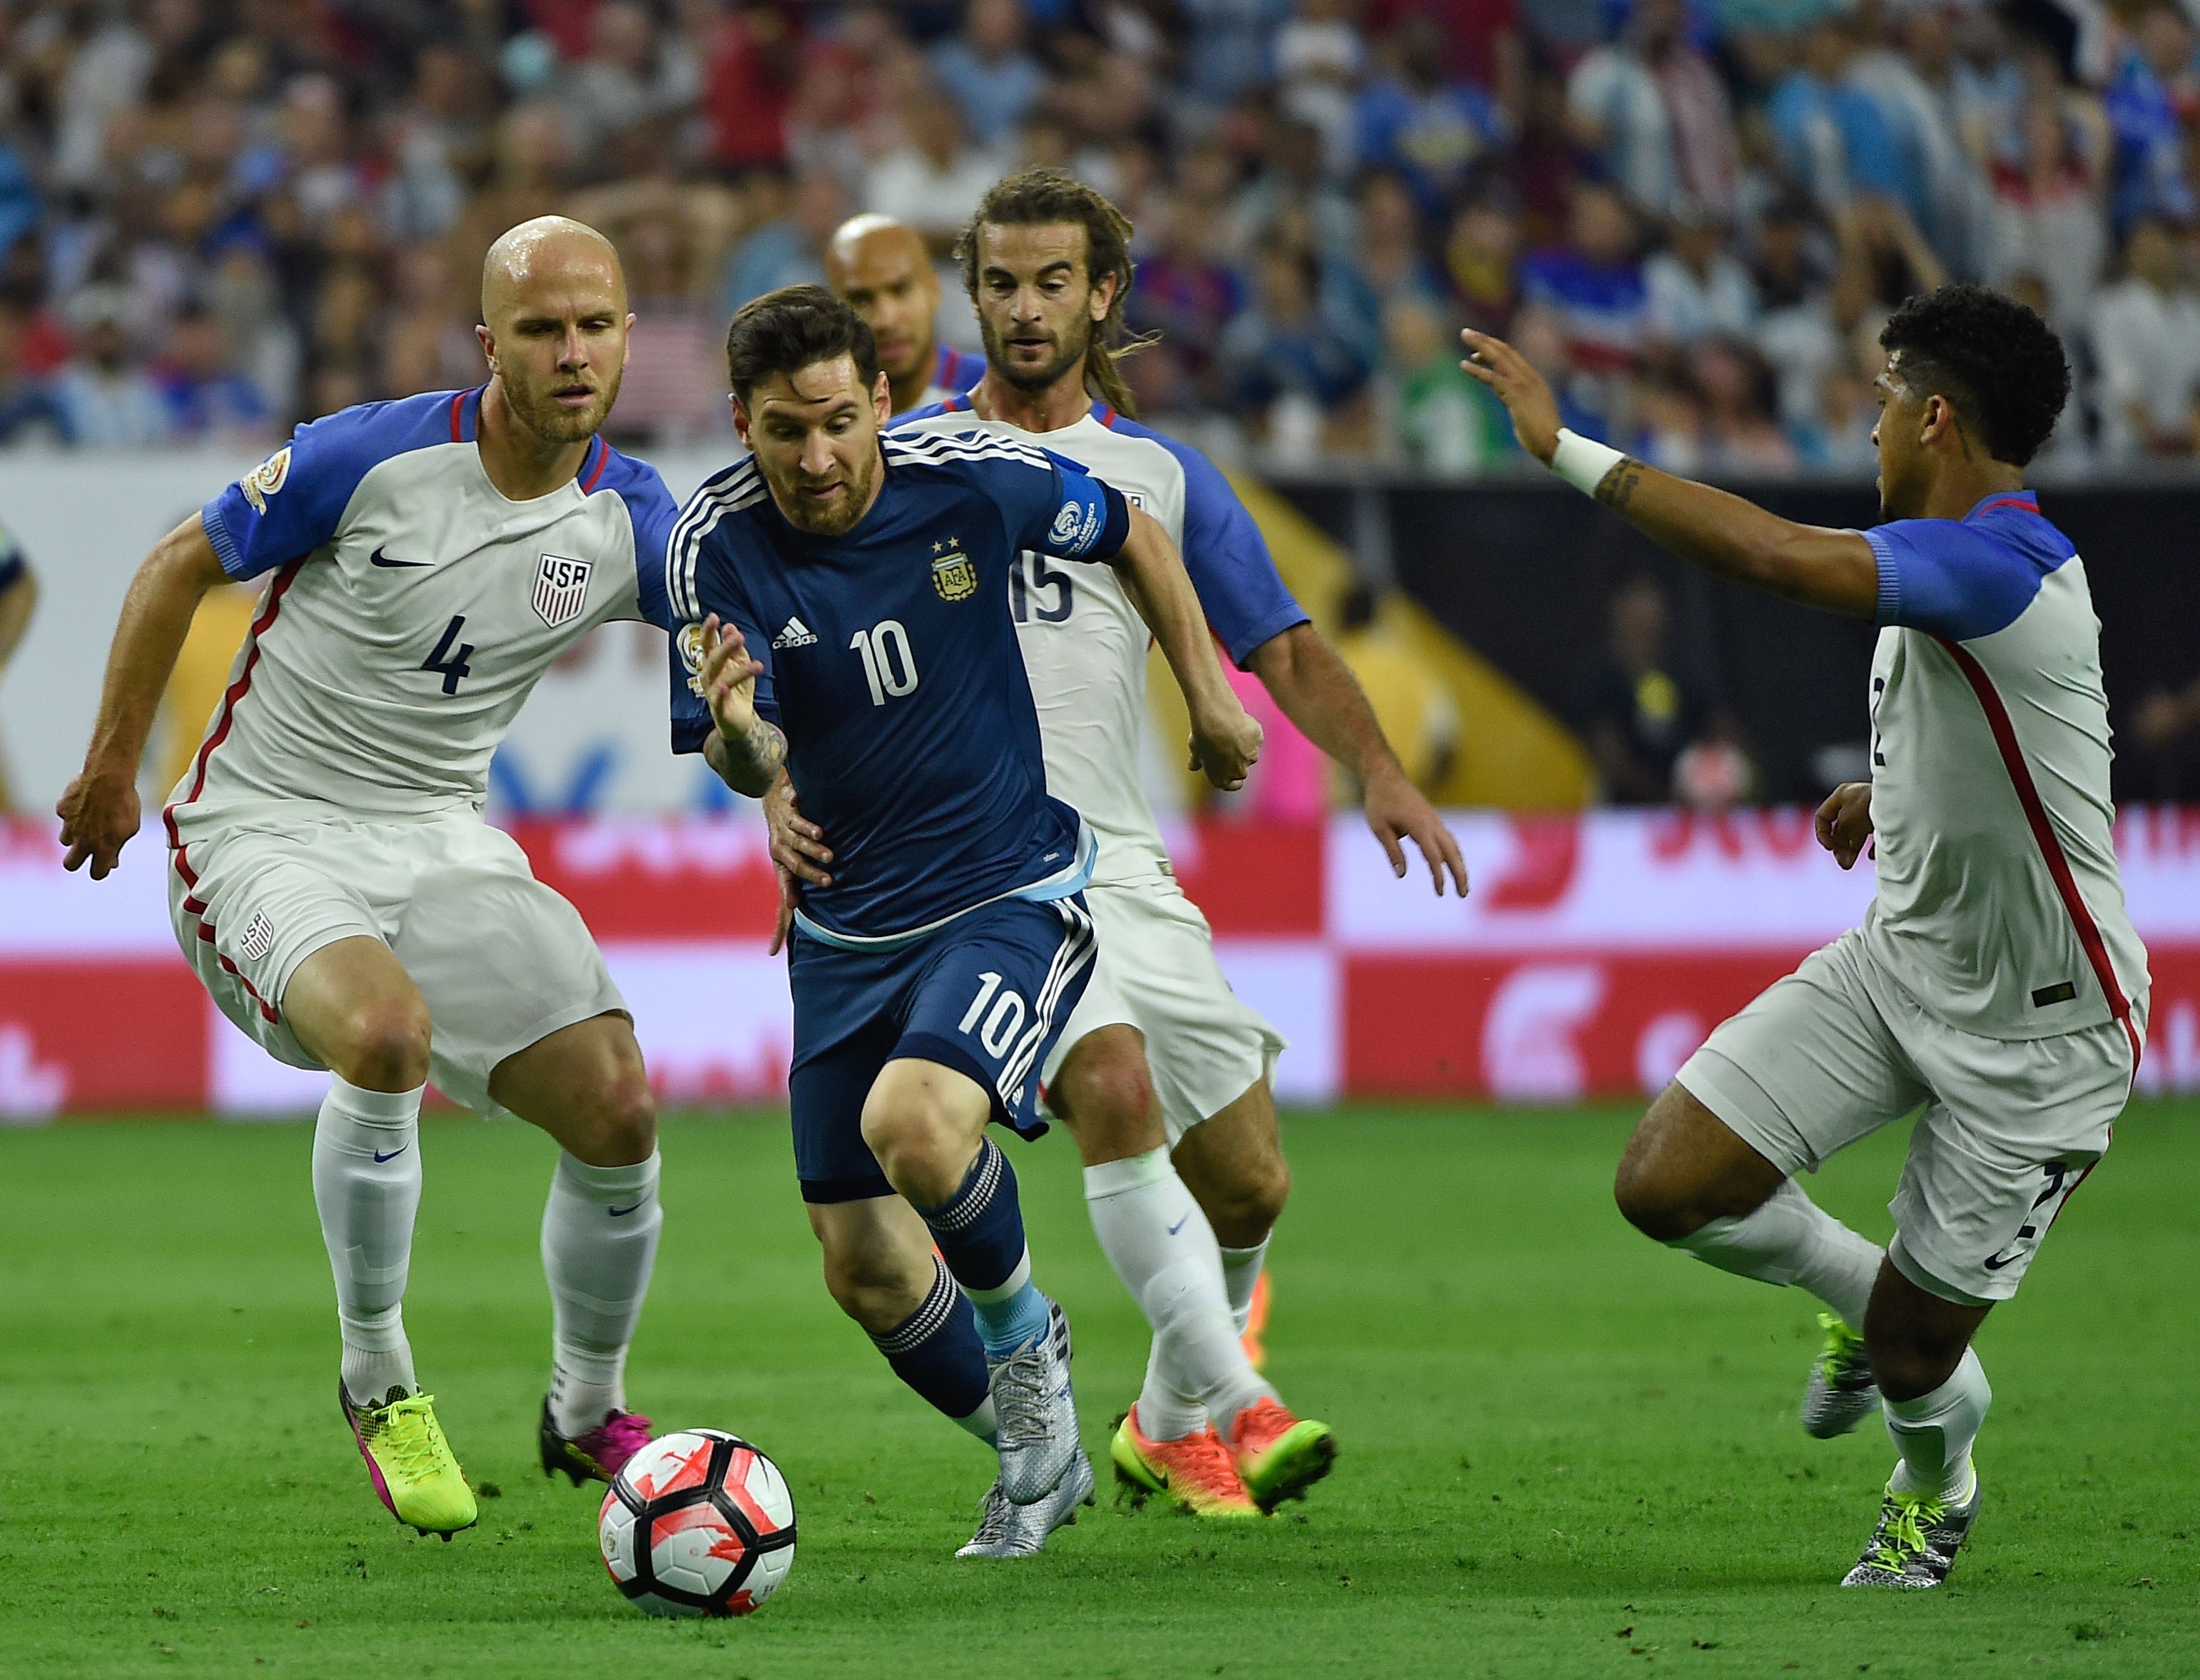 USAArgentina Highlights Score & Goals at Copa America